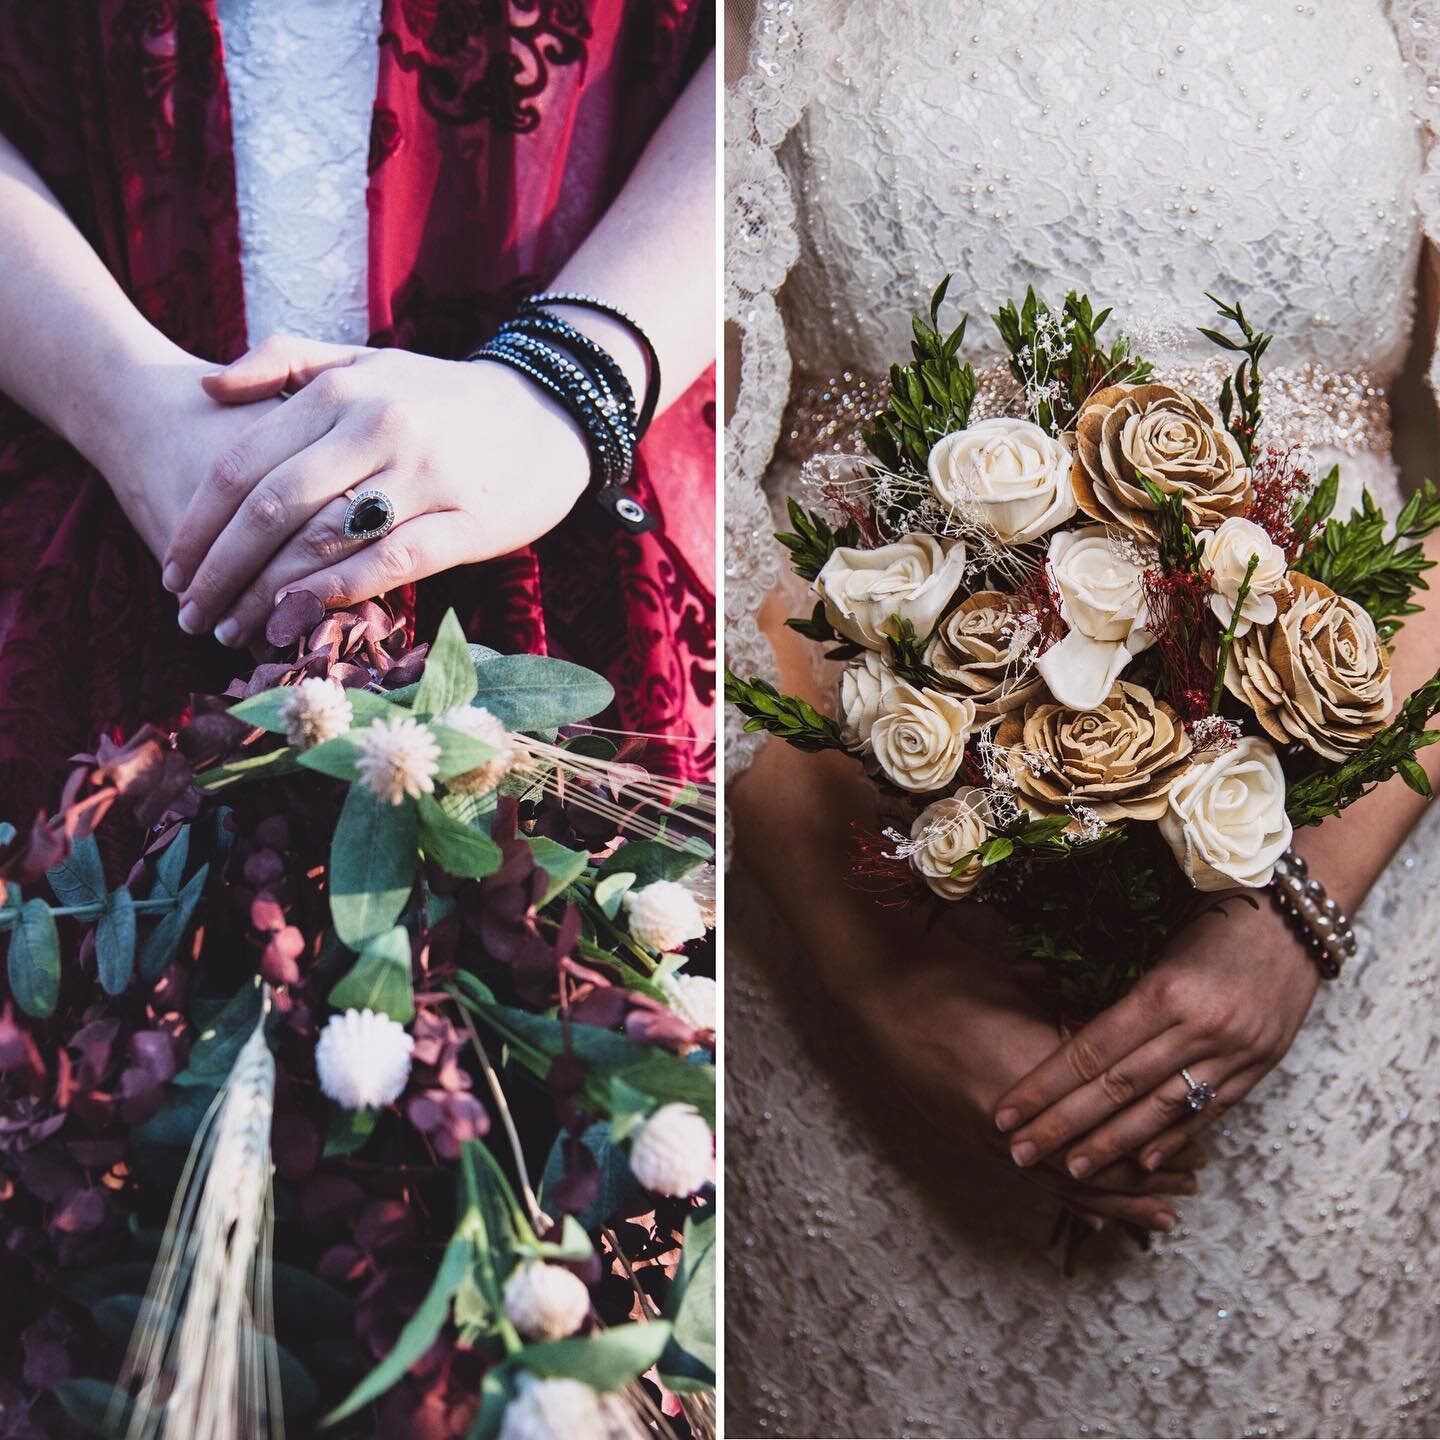 Are you more traditional or are you going different on your wedding day?
Tell me Right? or Left??